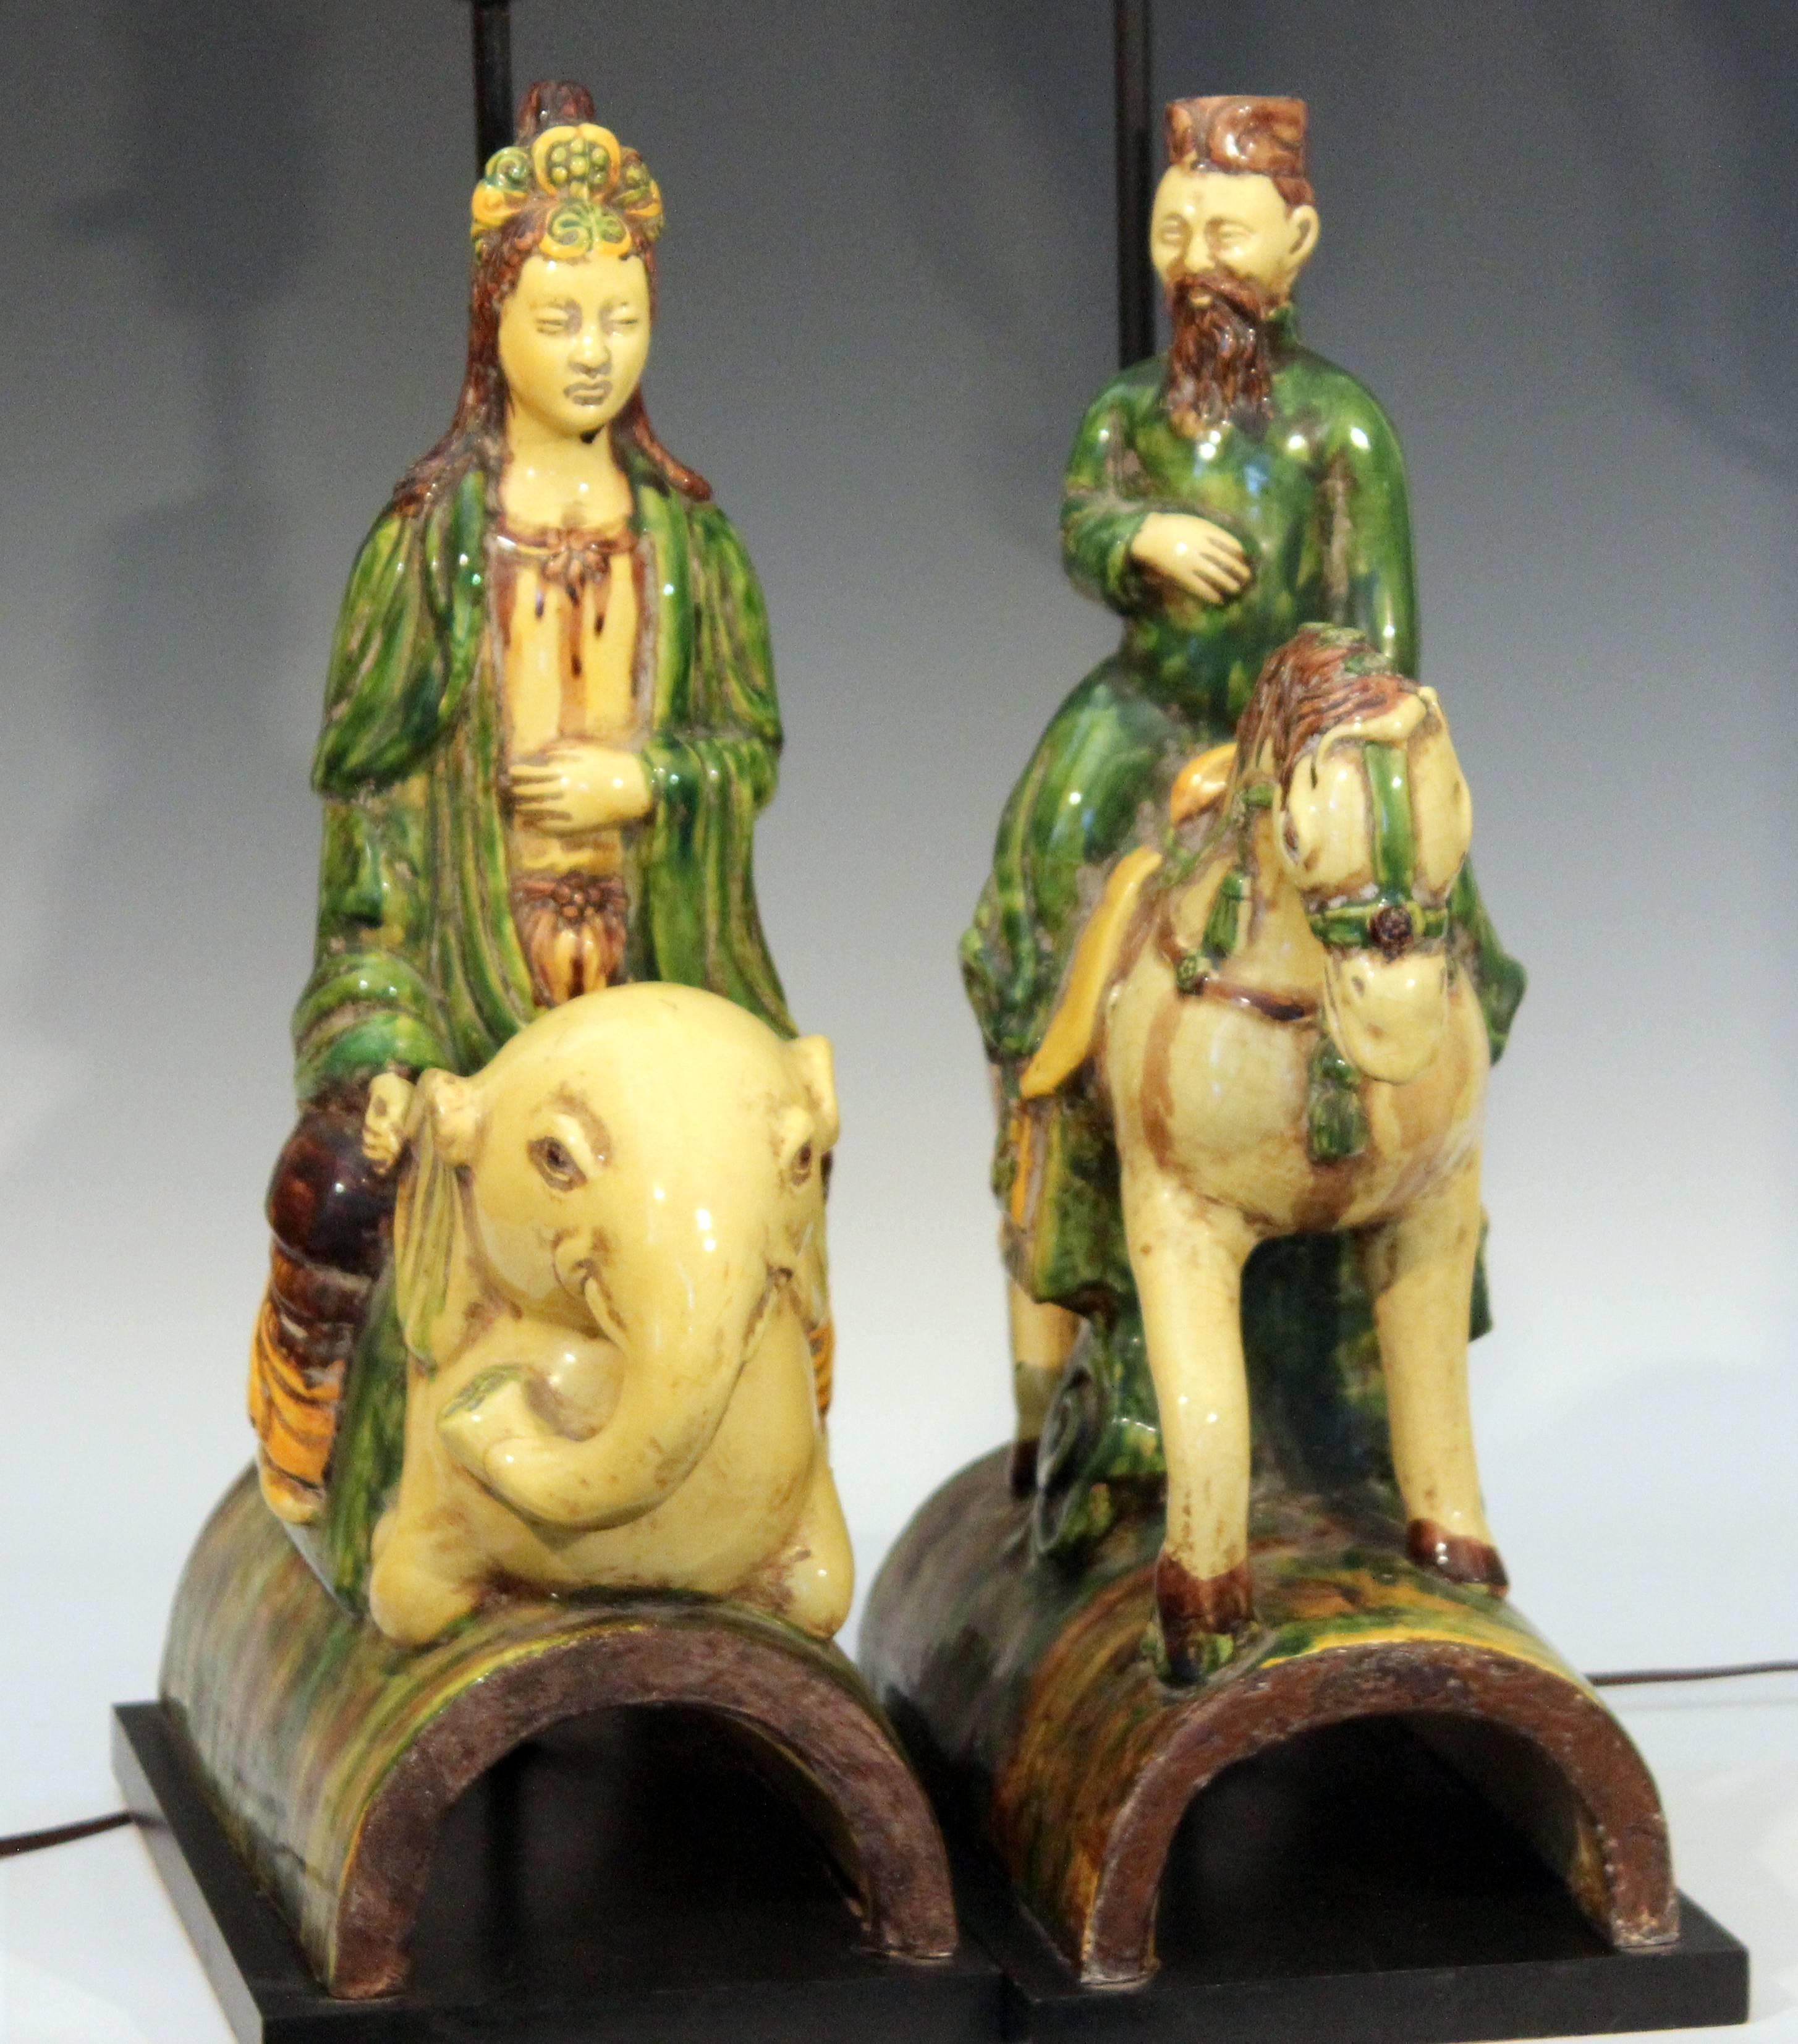 Pair of Zaccagnini Guanyin Buddha Figures Vintage Italian Ming Roof Tile Lamps 1